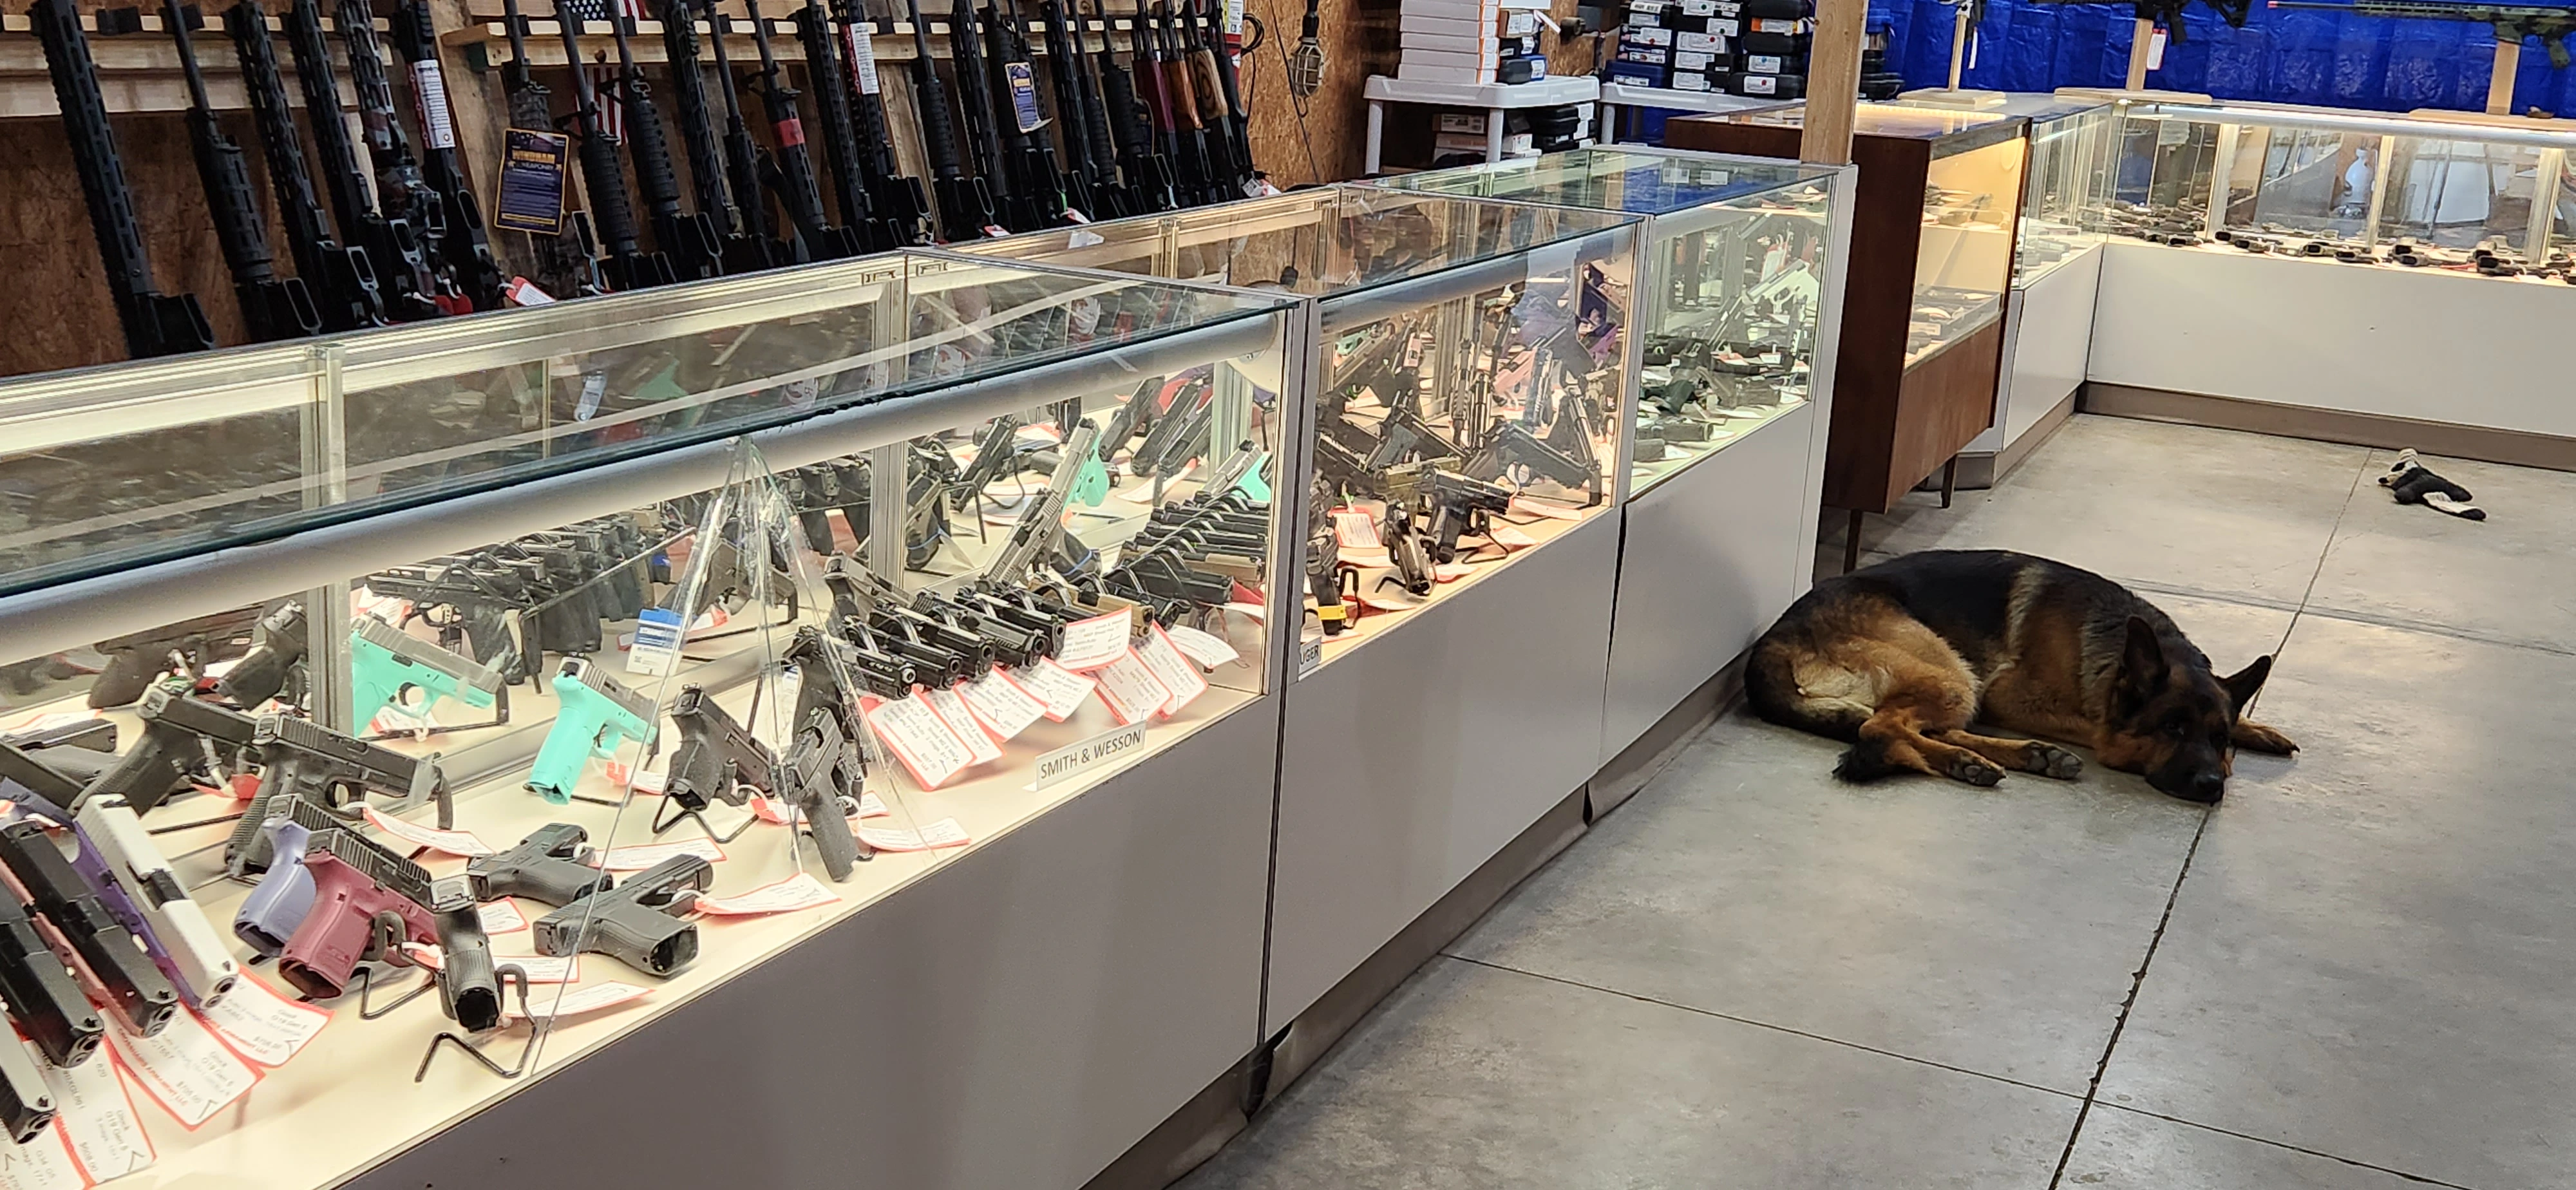 A selection of rifles and shotguns mounted on wall display in Crosshairs Armament LLC.